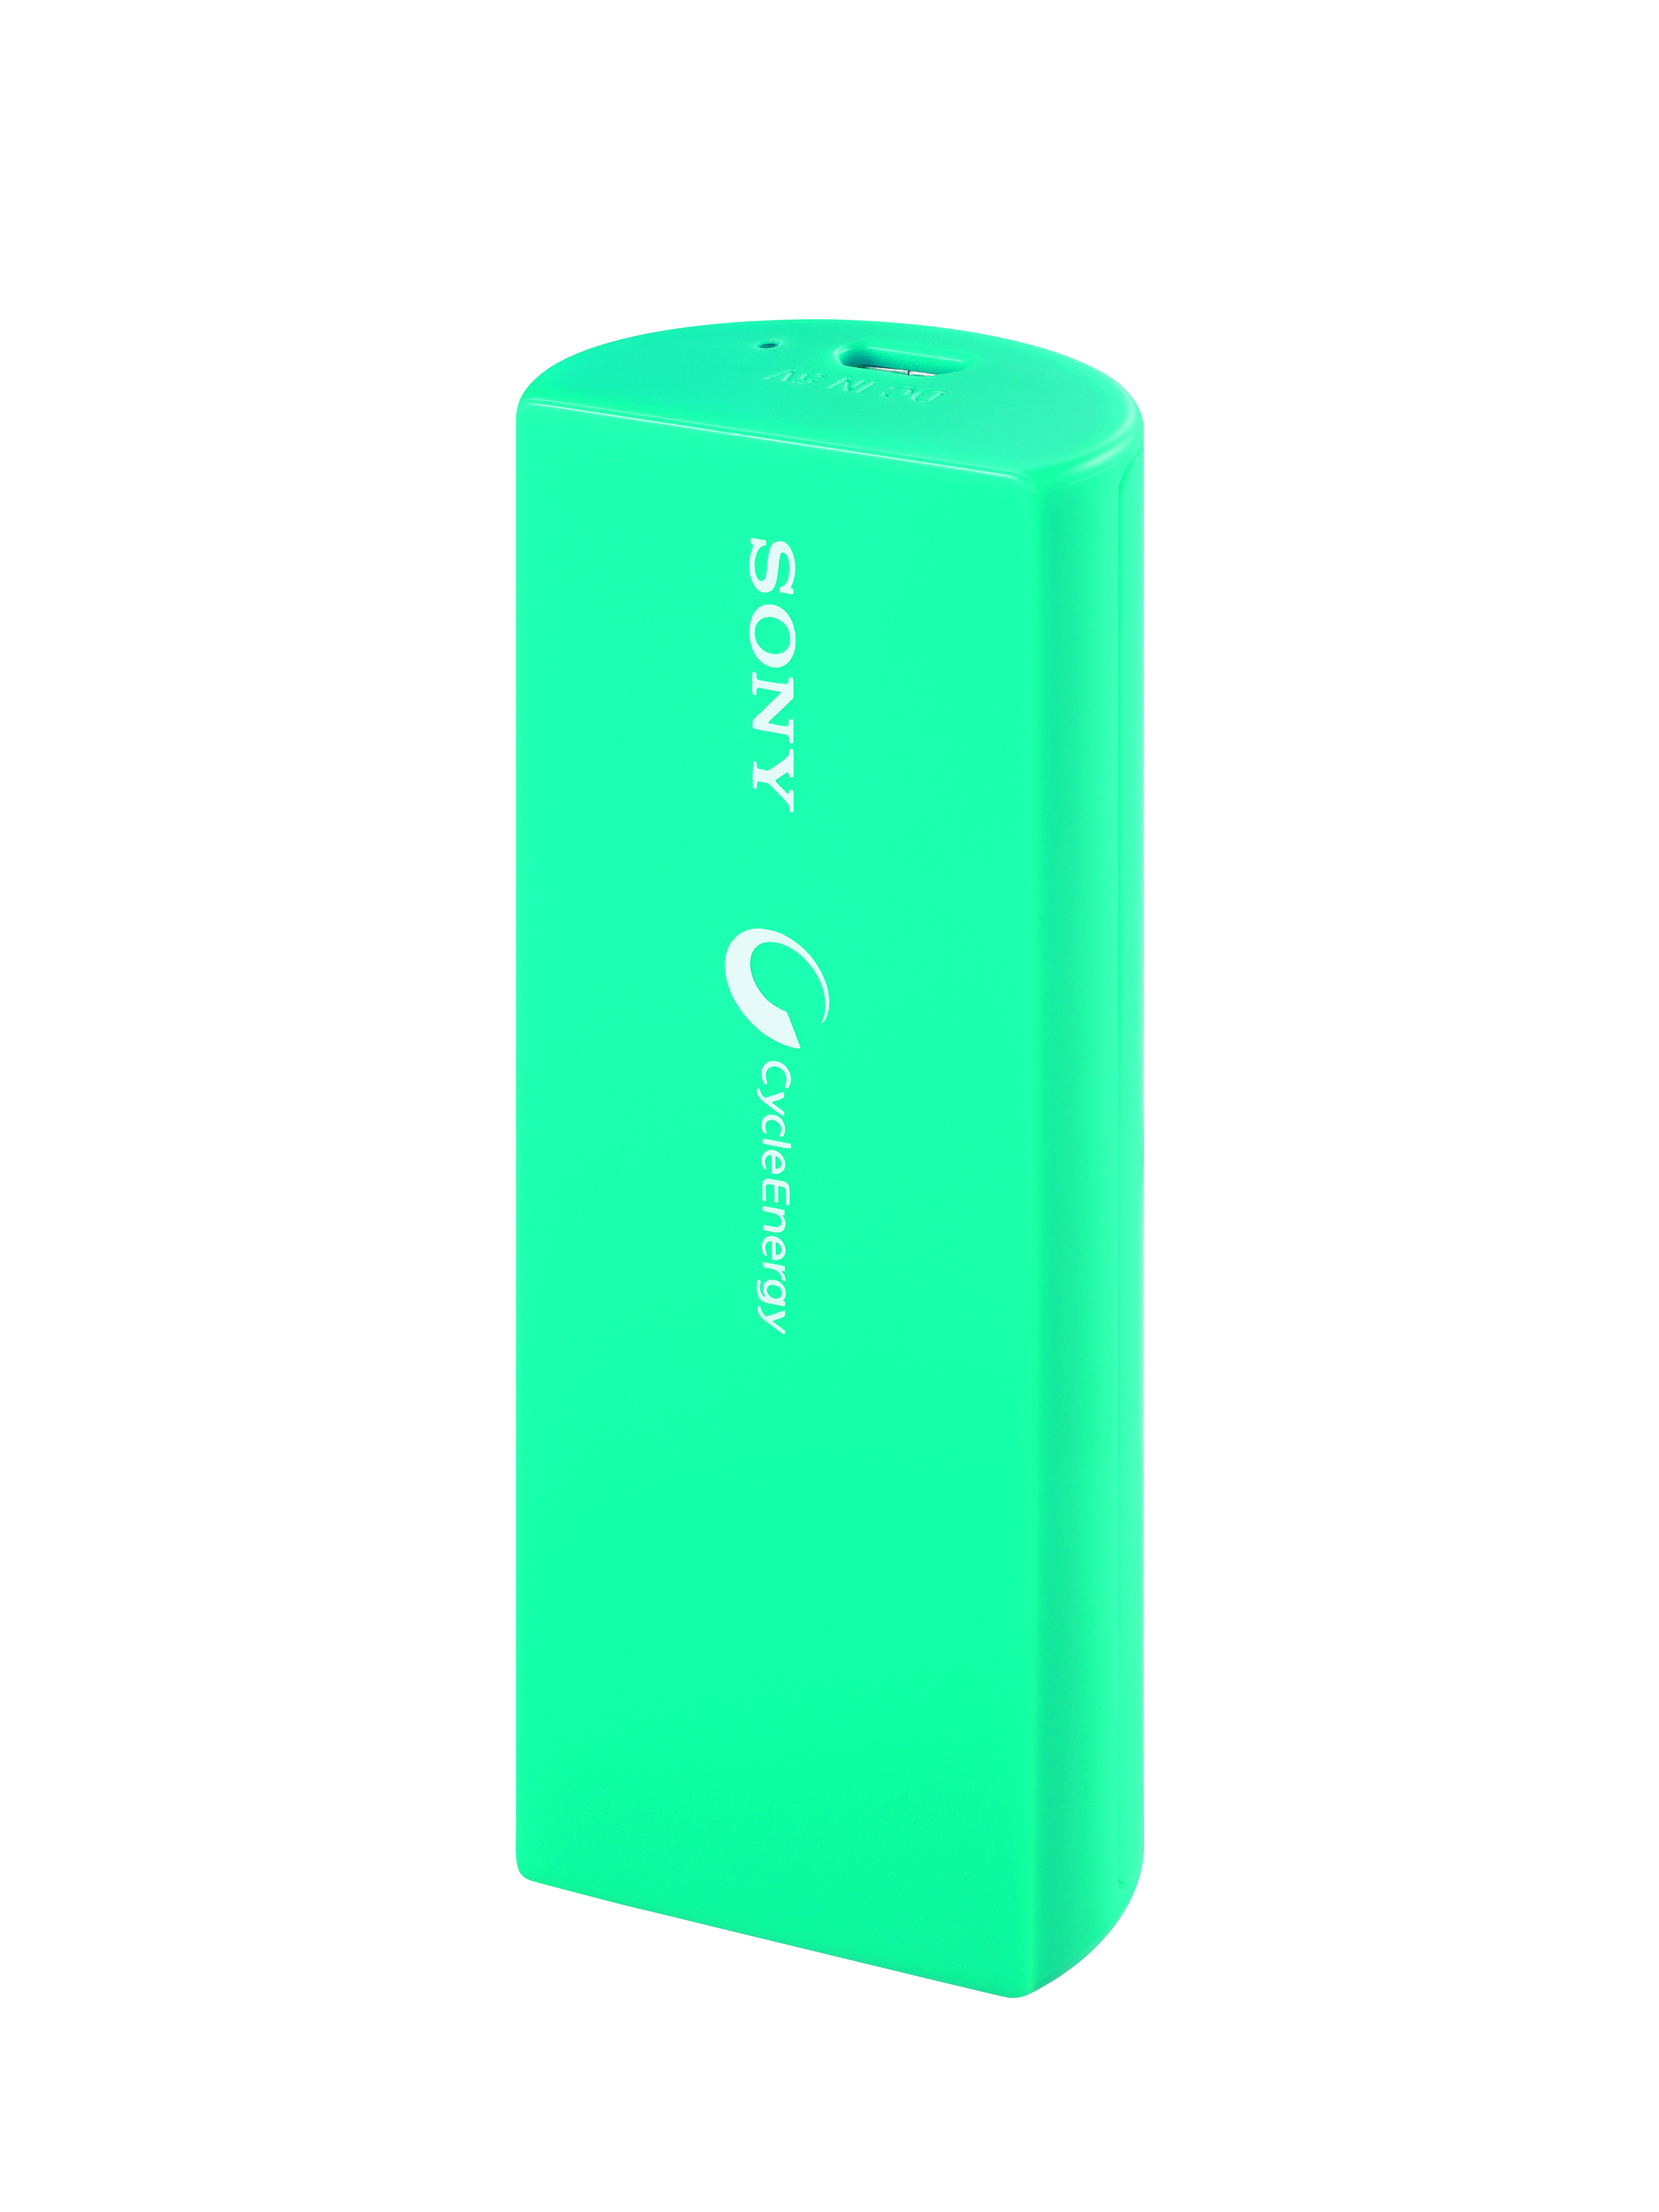 Best portable charger